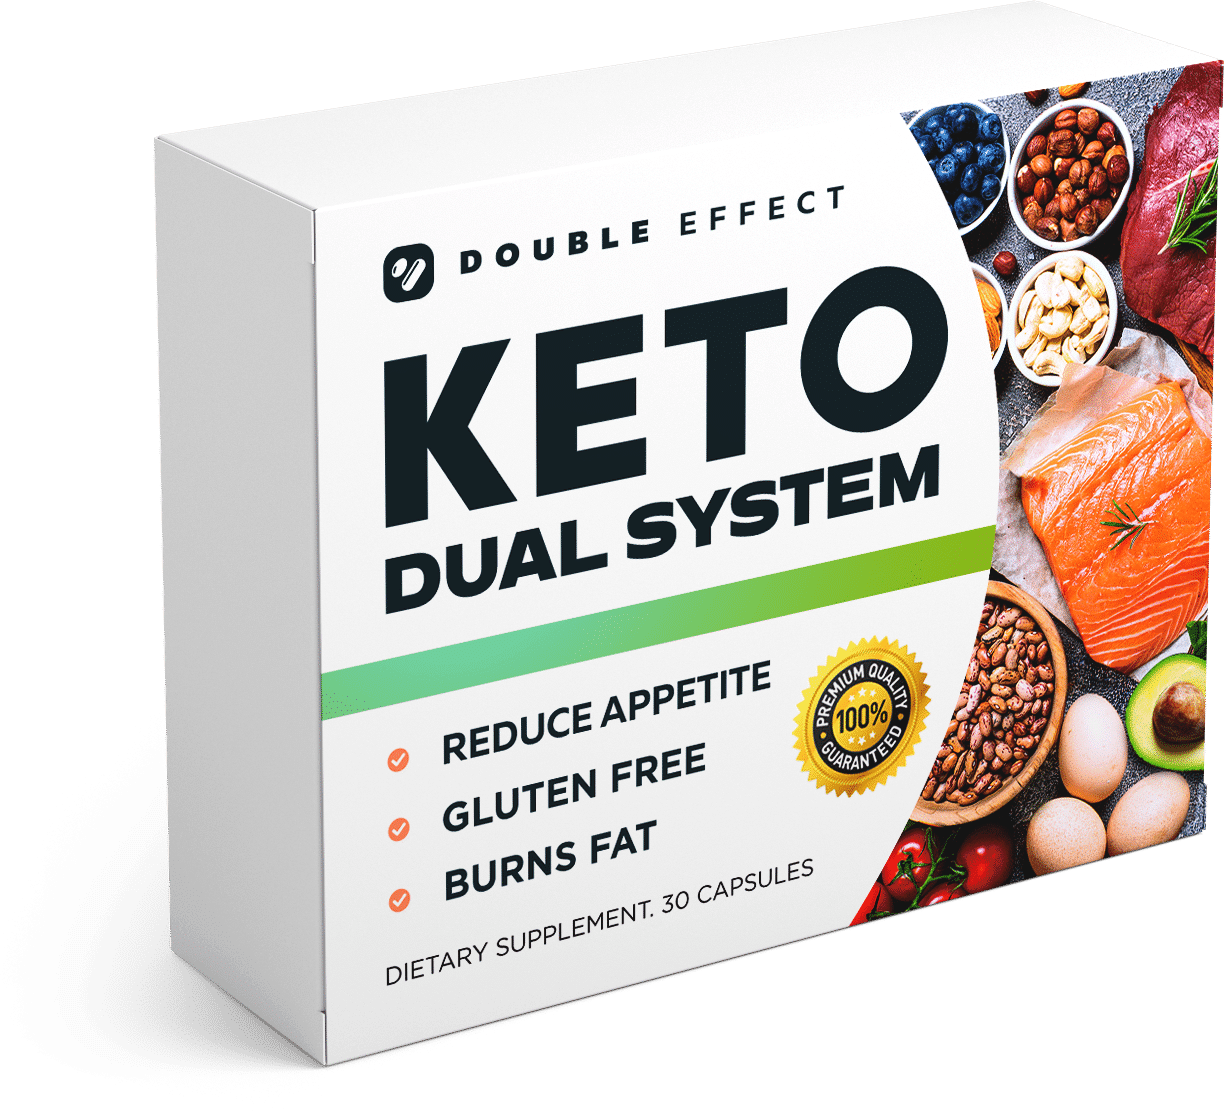 Keto Dual System What is it? Reviews 2023. How to use the product?